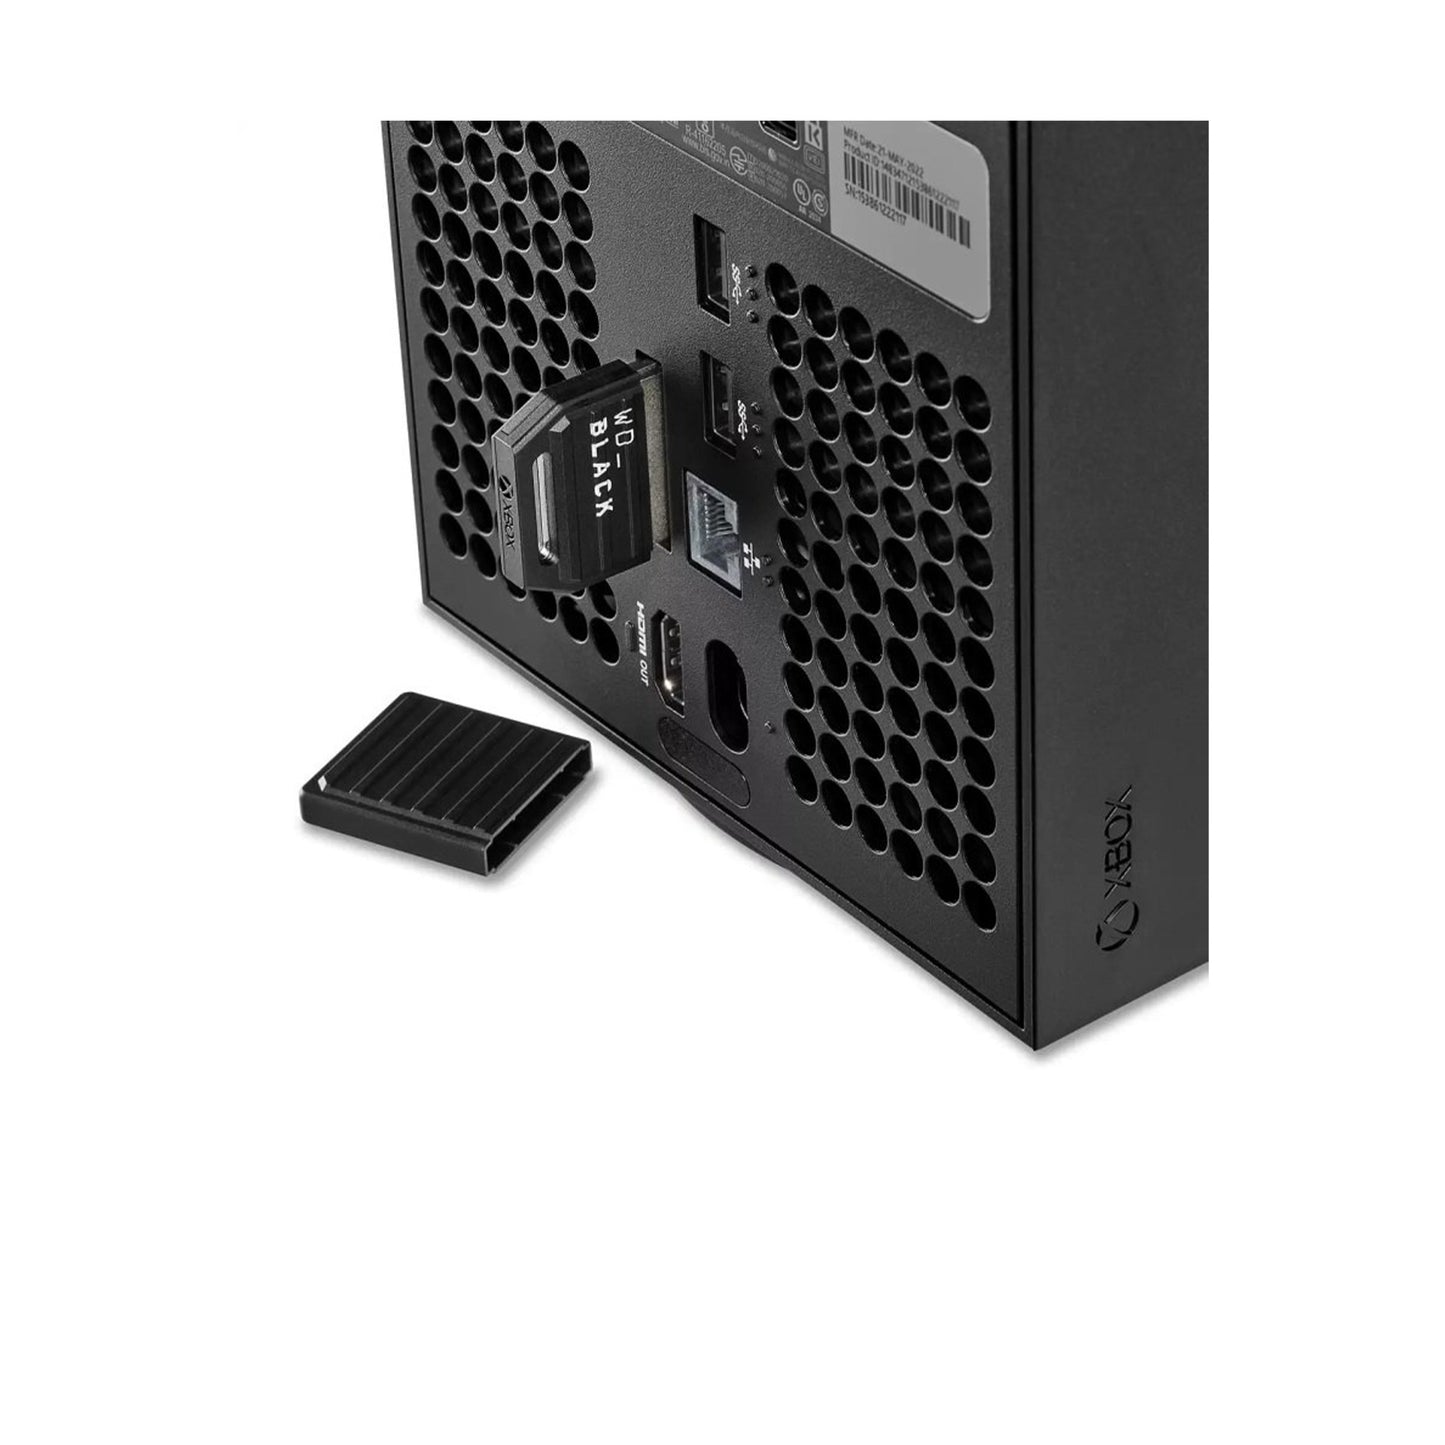 WD_BLACK C50 Storage Expansion Card for Xbox from WD_BLACK